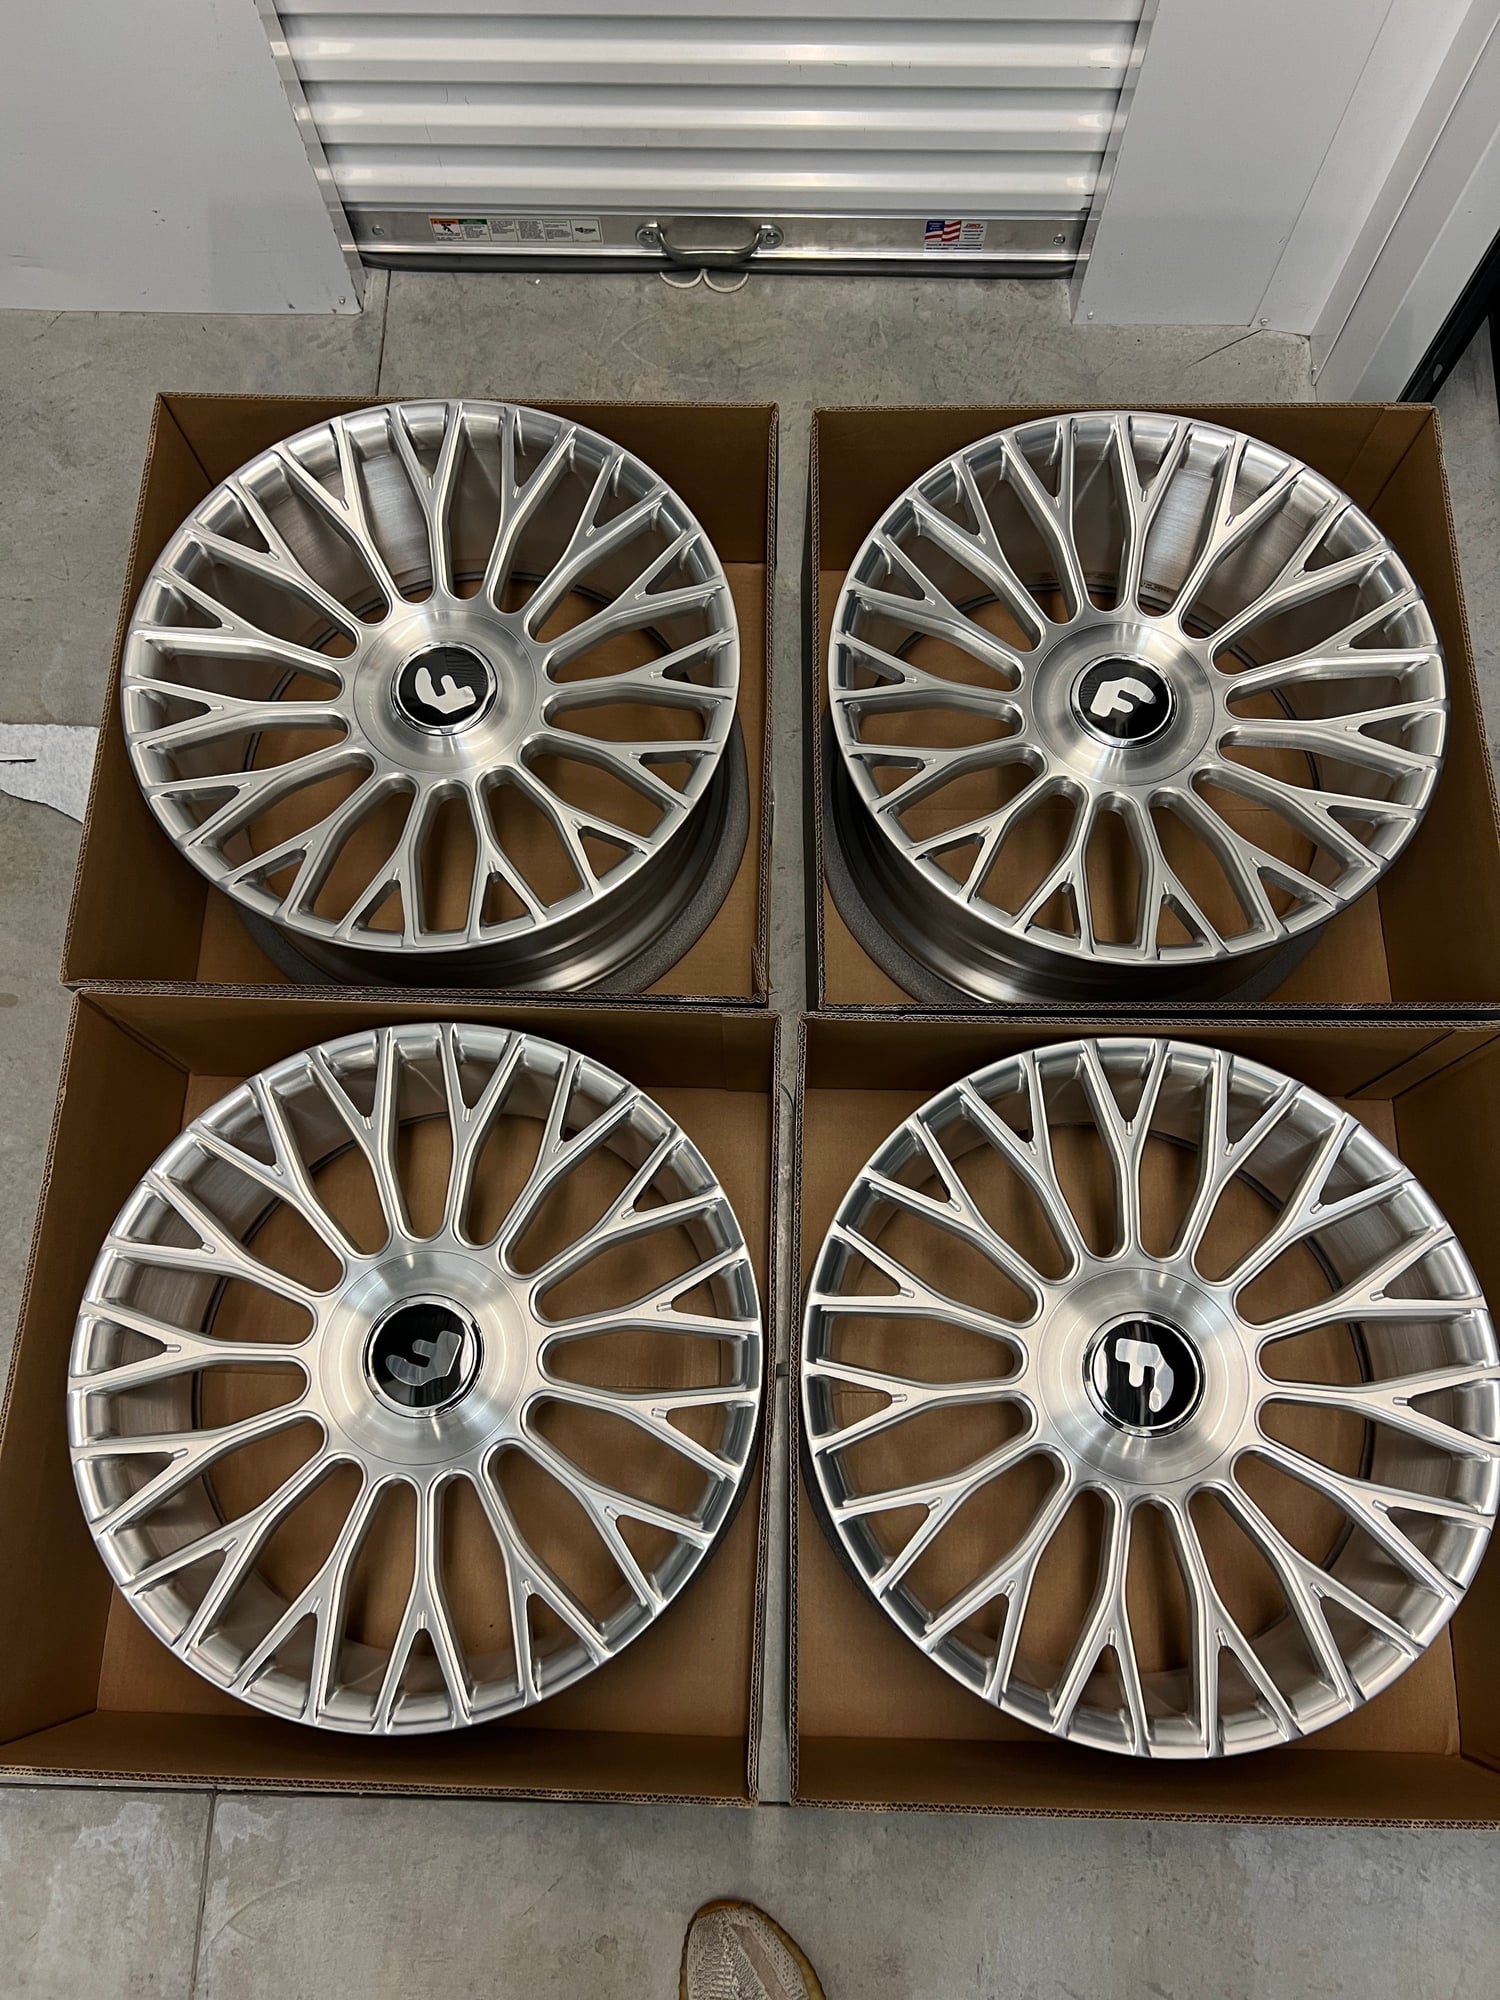 Wheels and Tires/Axles - For Sale: Brand New 22" Forgiato's for Mercedes S-Class (W222 &... - New - 2014 to 2025 Mercedes-Benz S-Class - Miami, FL 33155, United States